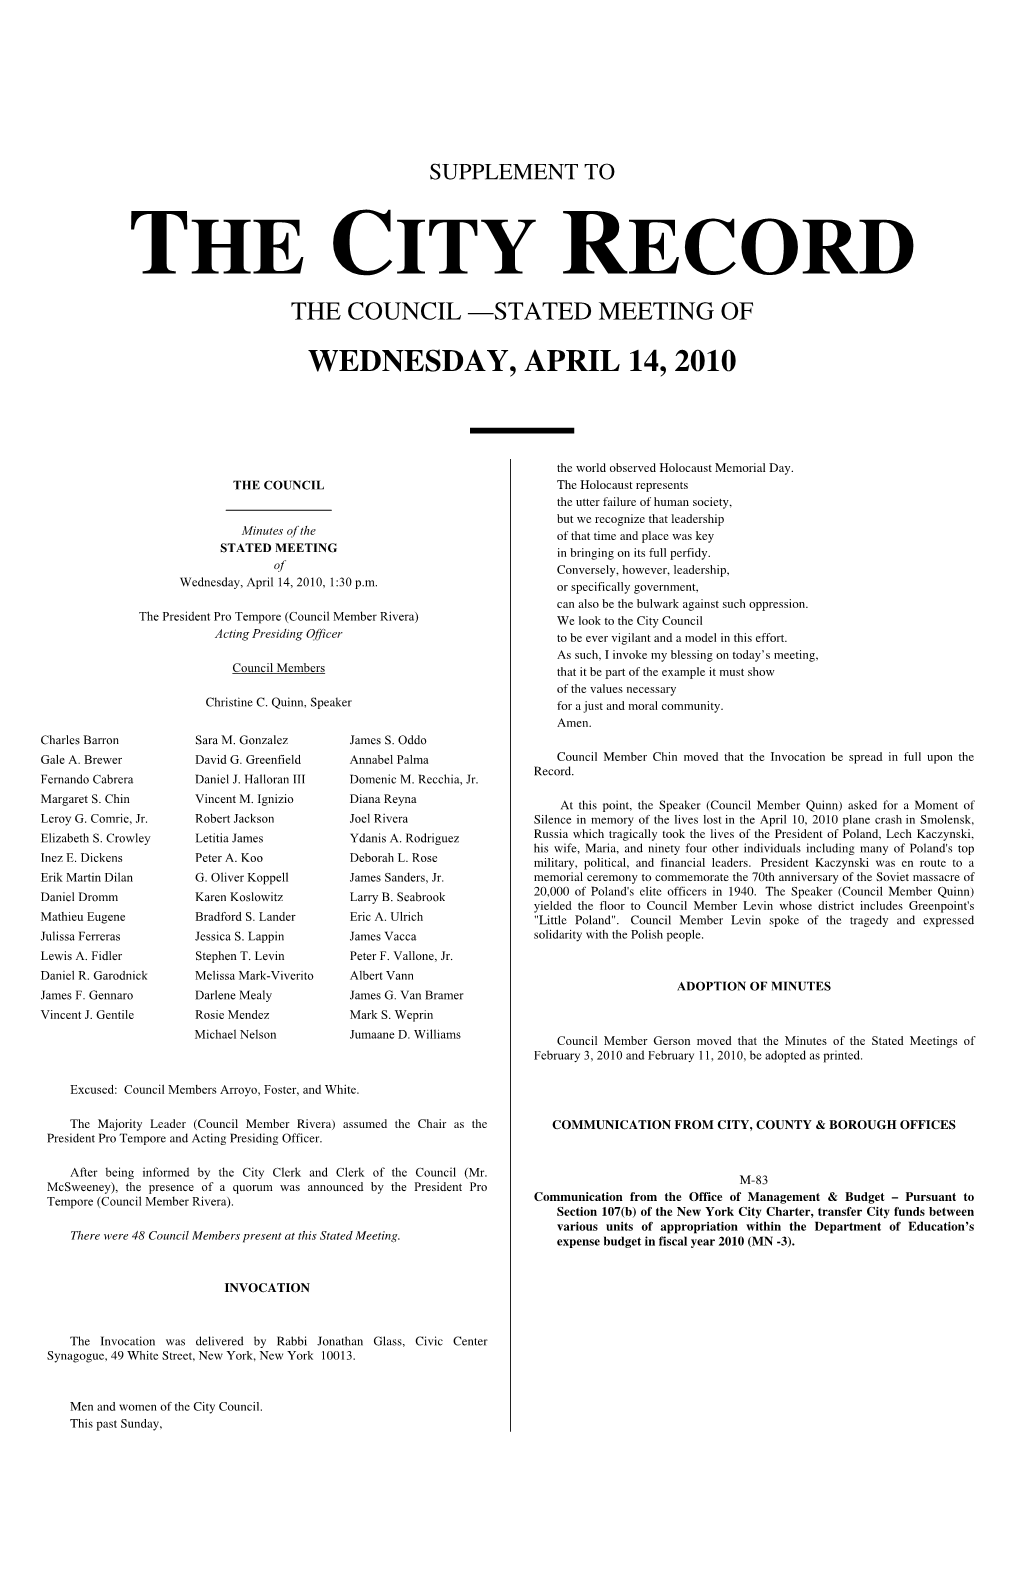 Supplement to the City Record the Council —Stated Meeting of Wednesday, April 14, 2010